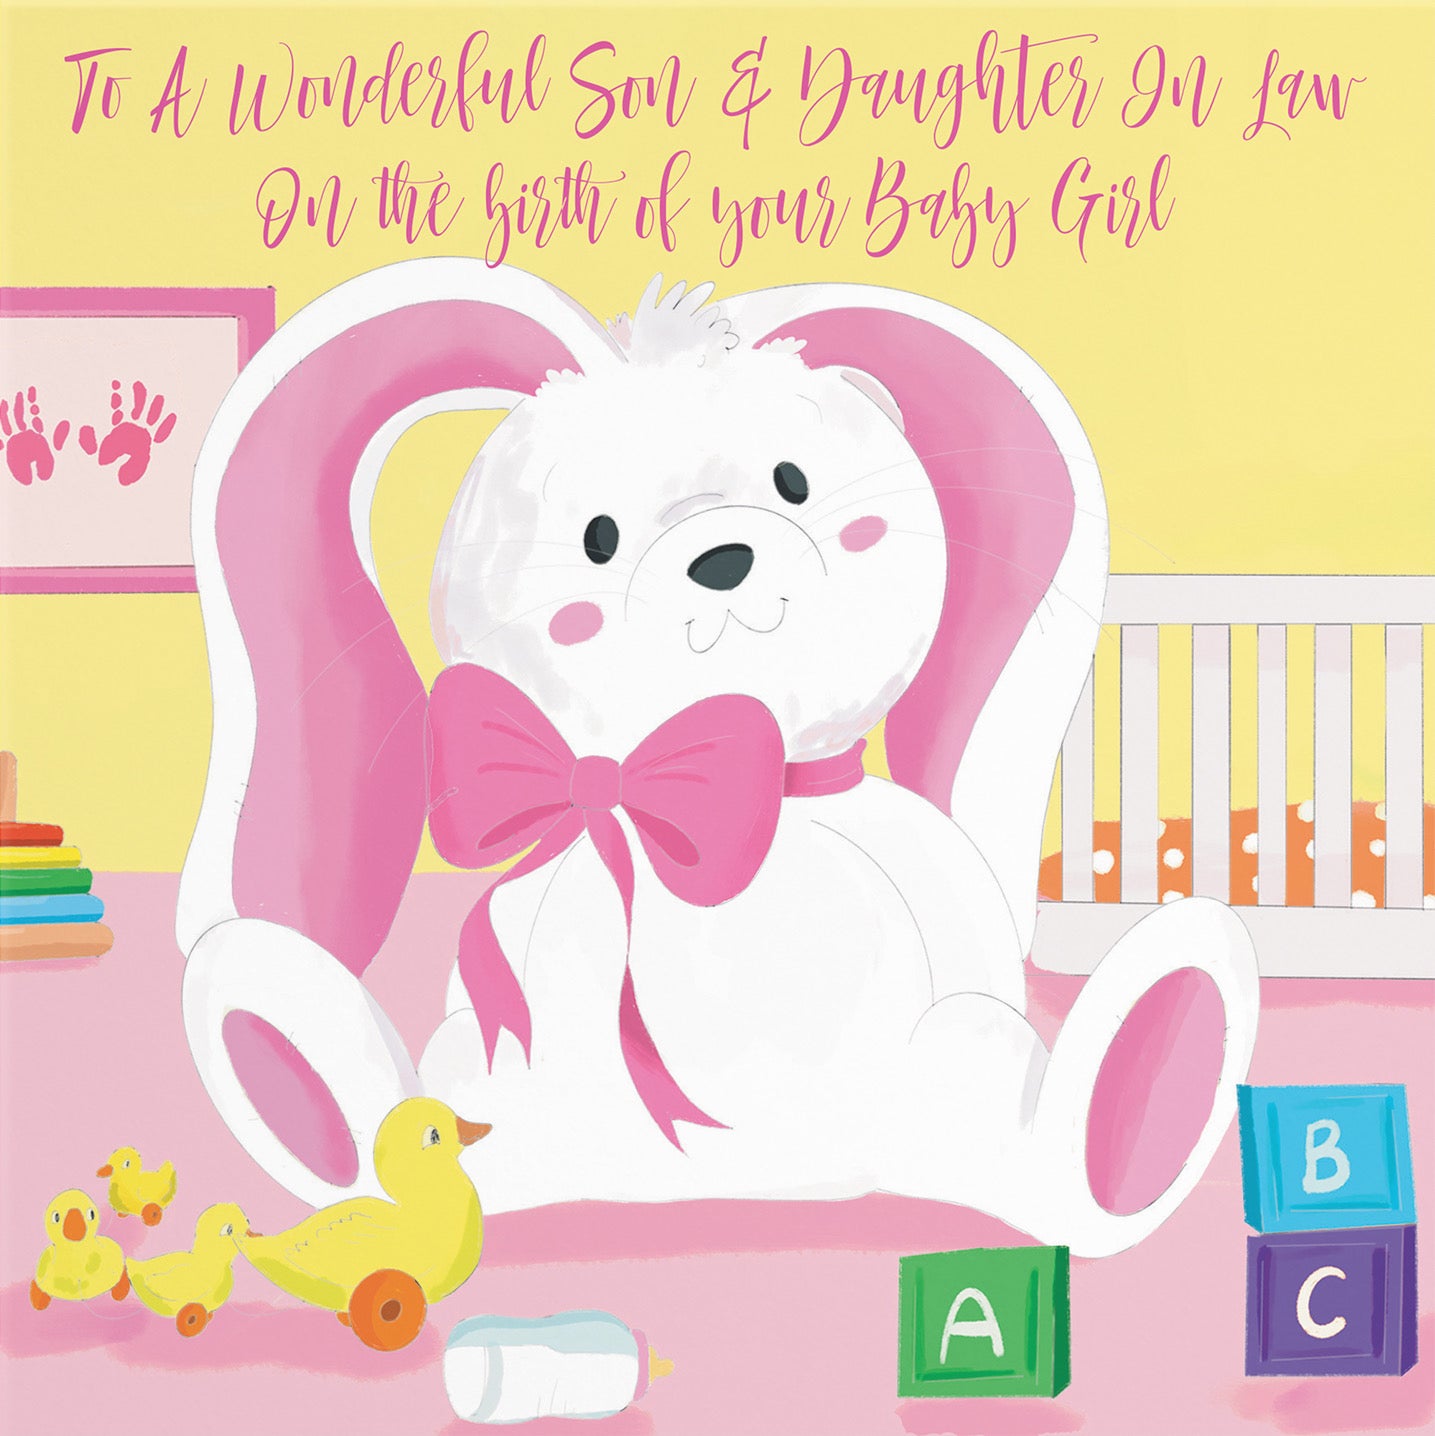 Son And Daughter In Law New Baby Girl Congratulations Card Pink Rabbit Classic - Default Title (B09VMNT5C4)